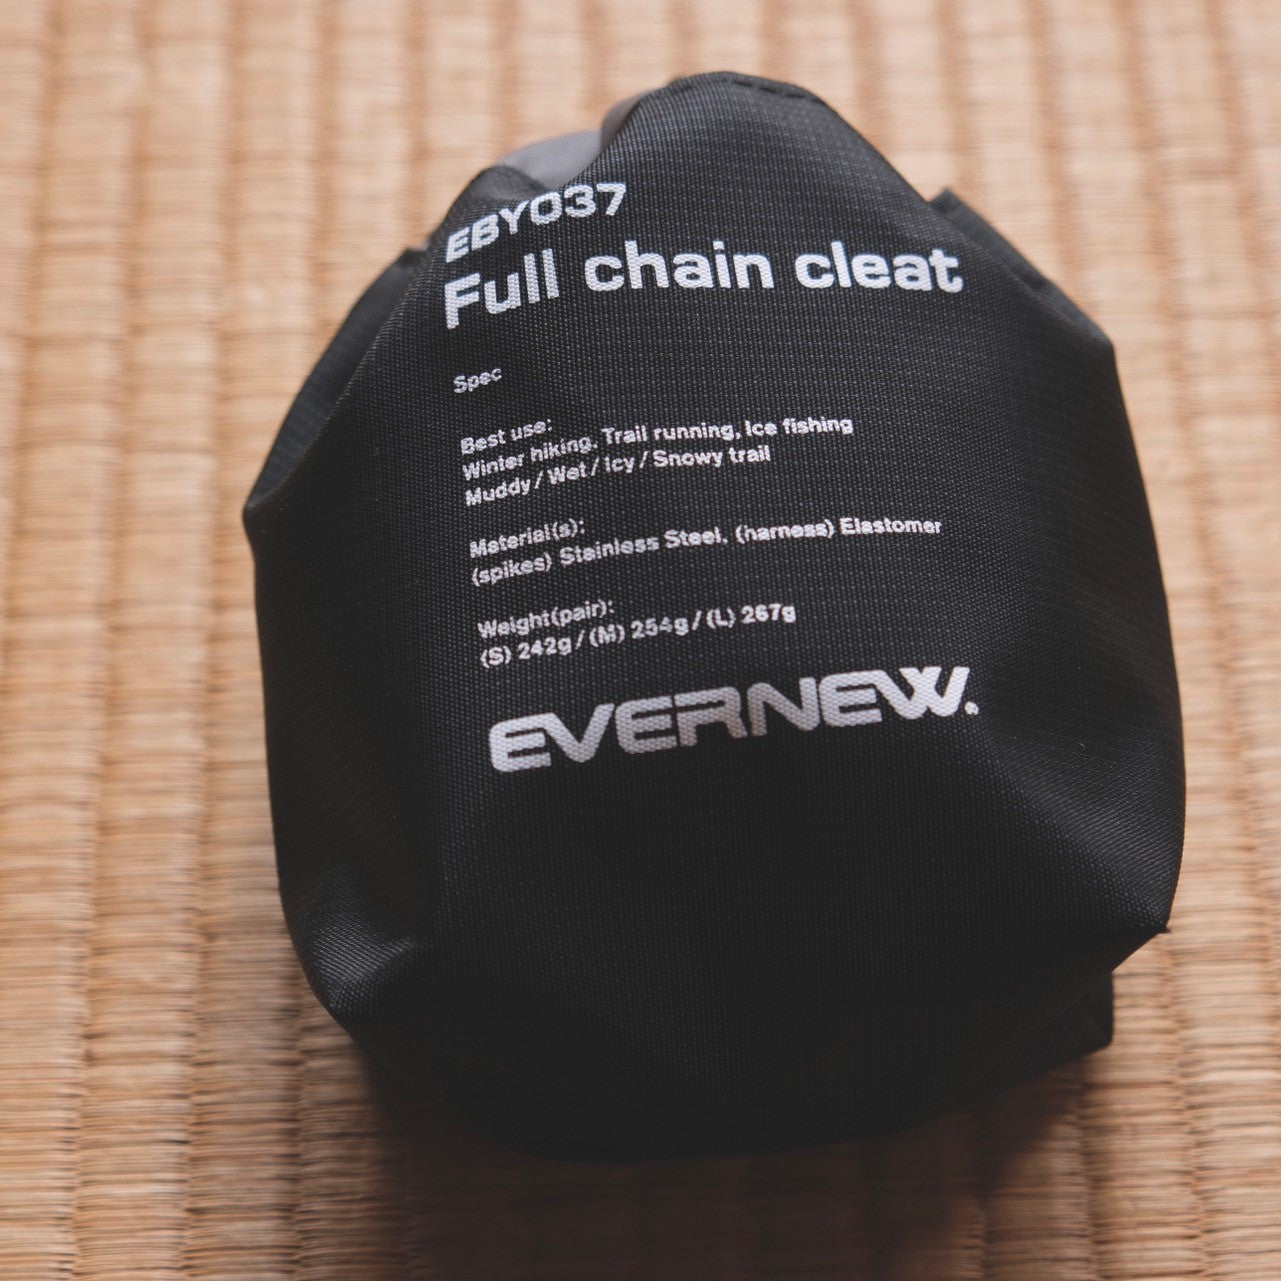 Full Chain cleat（軽量チェーンスパイク）【EVERNEW】